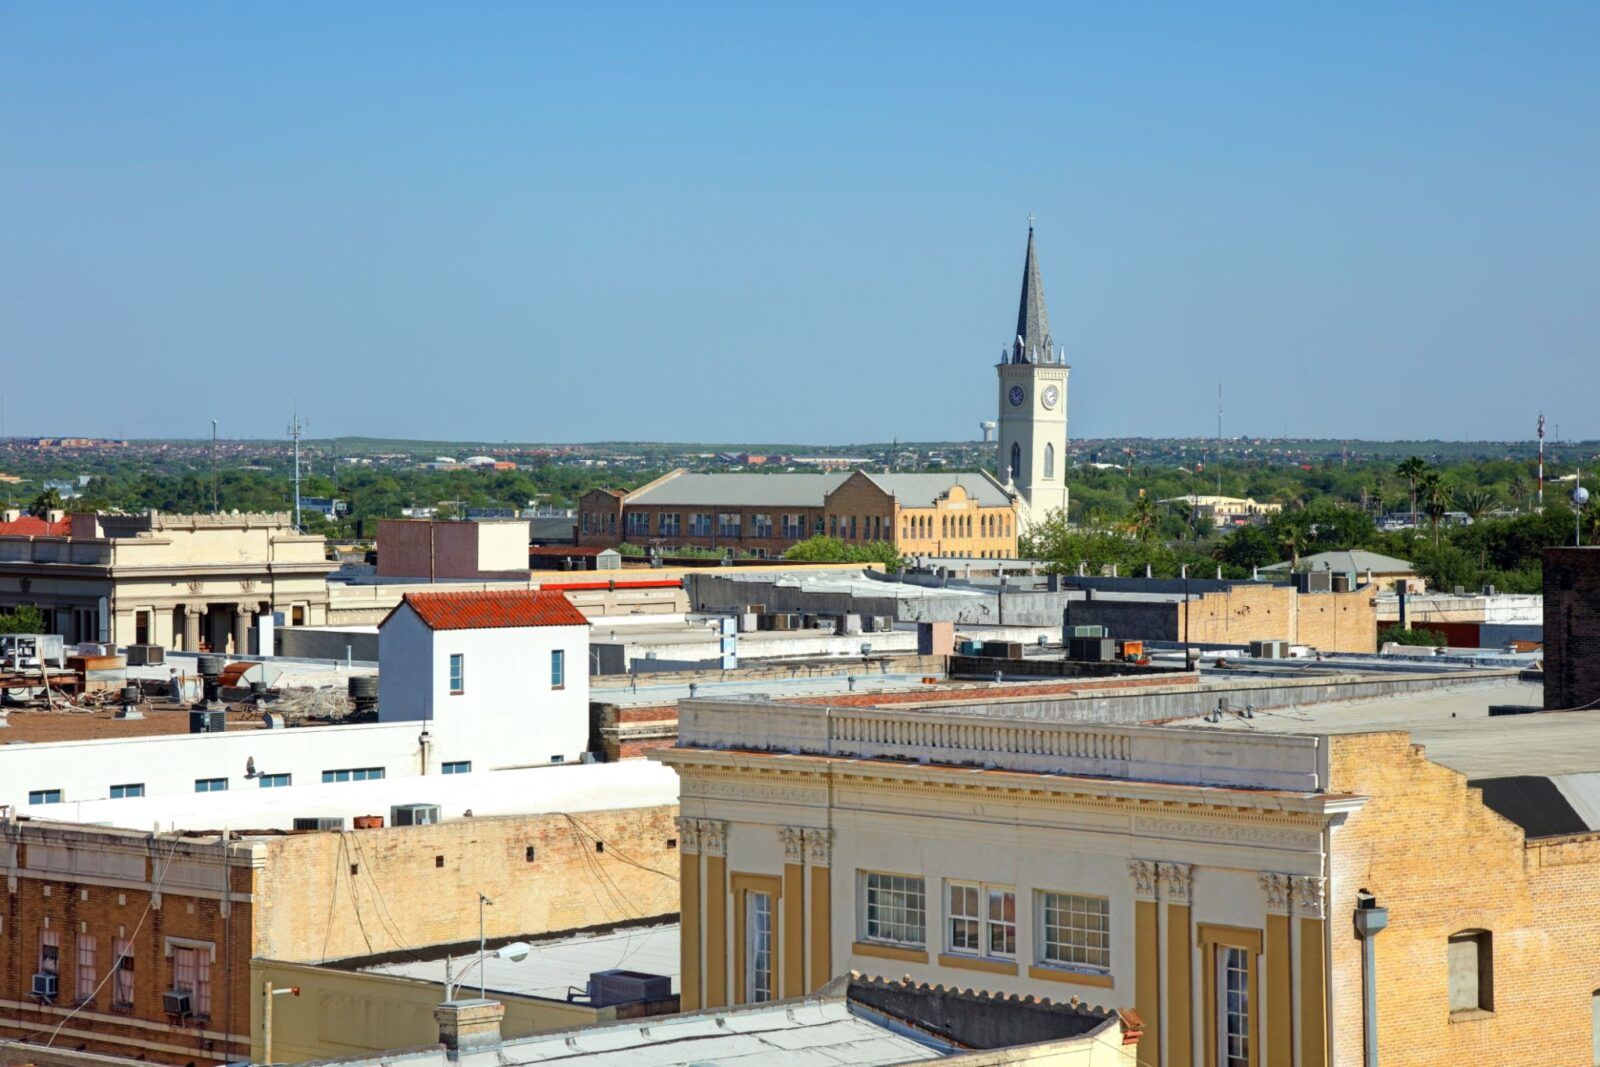 Laredo is a city in and the county seat of Webb County, Texas, United States, on the north bank of the Rio Grande in South Texas, across from Nuevo Laredo, Tamaulipas, Mexico.